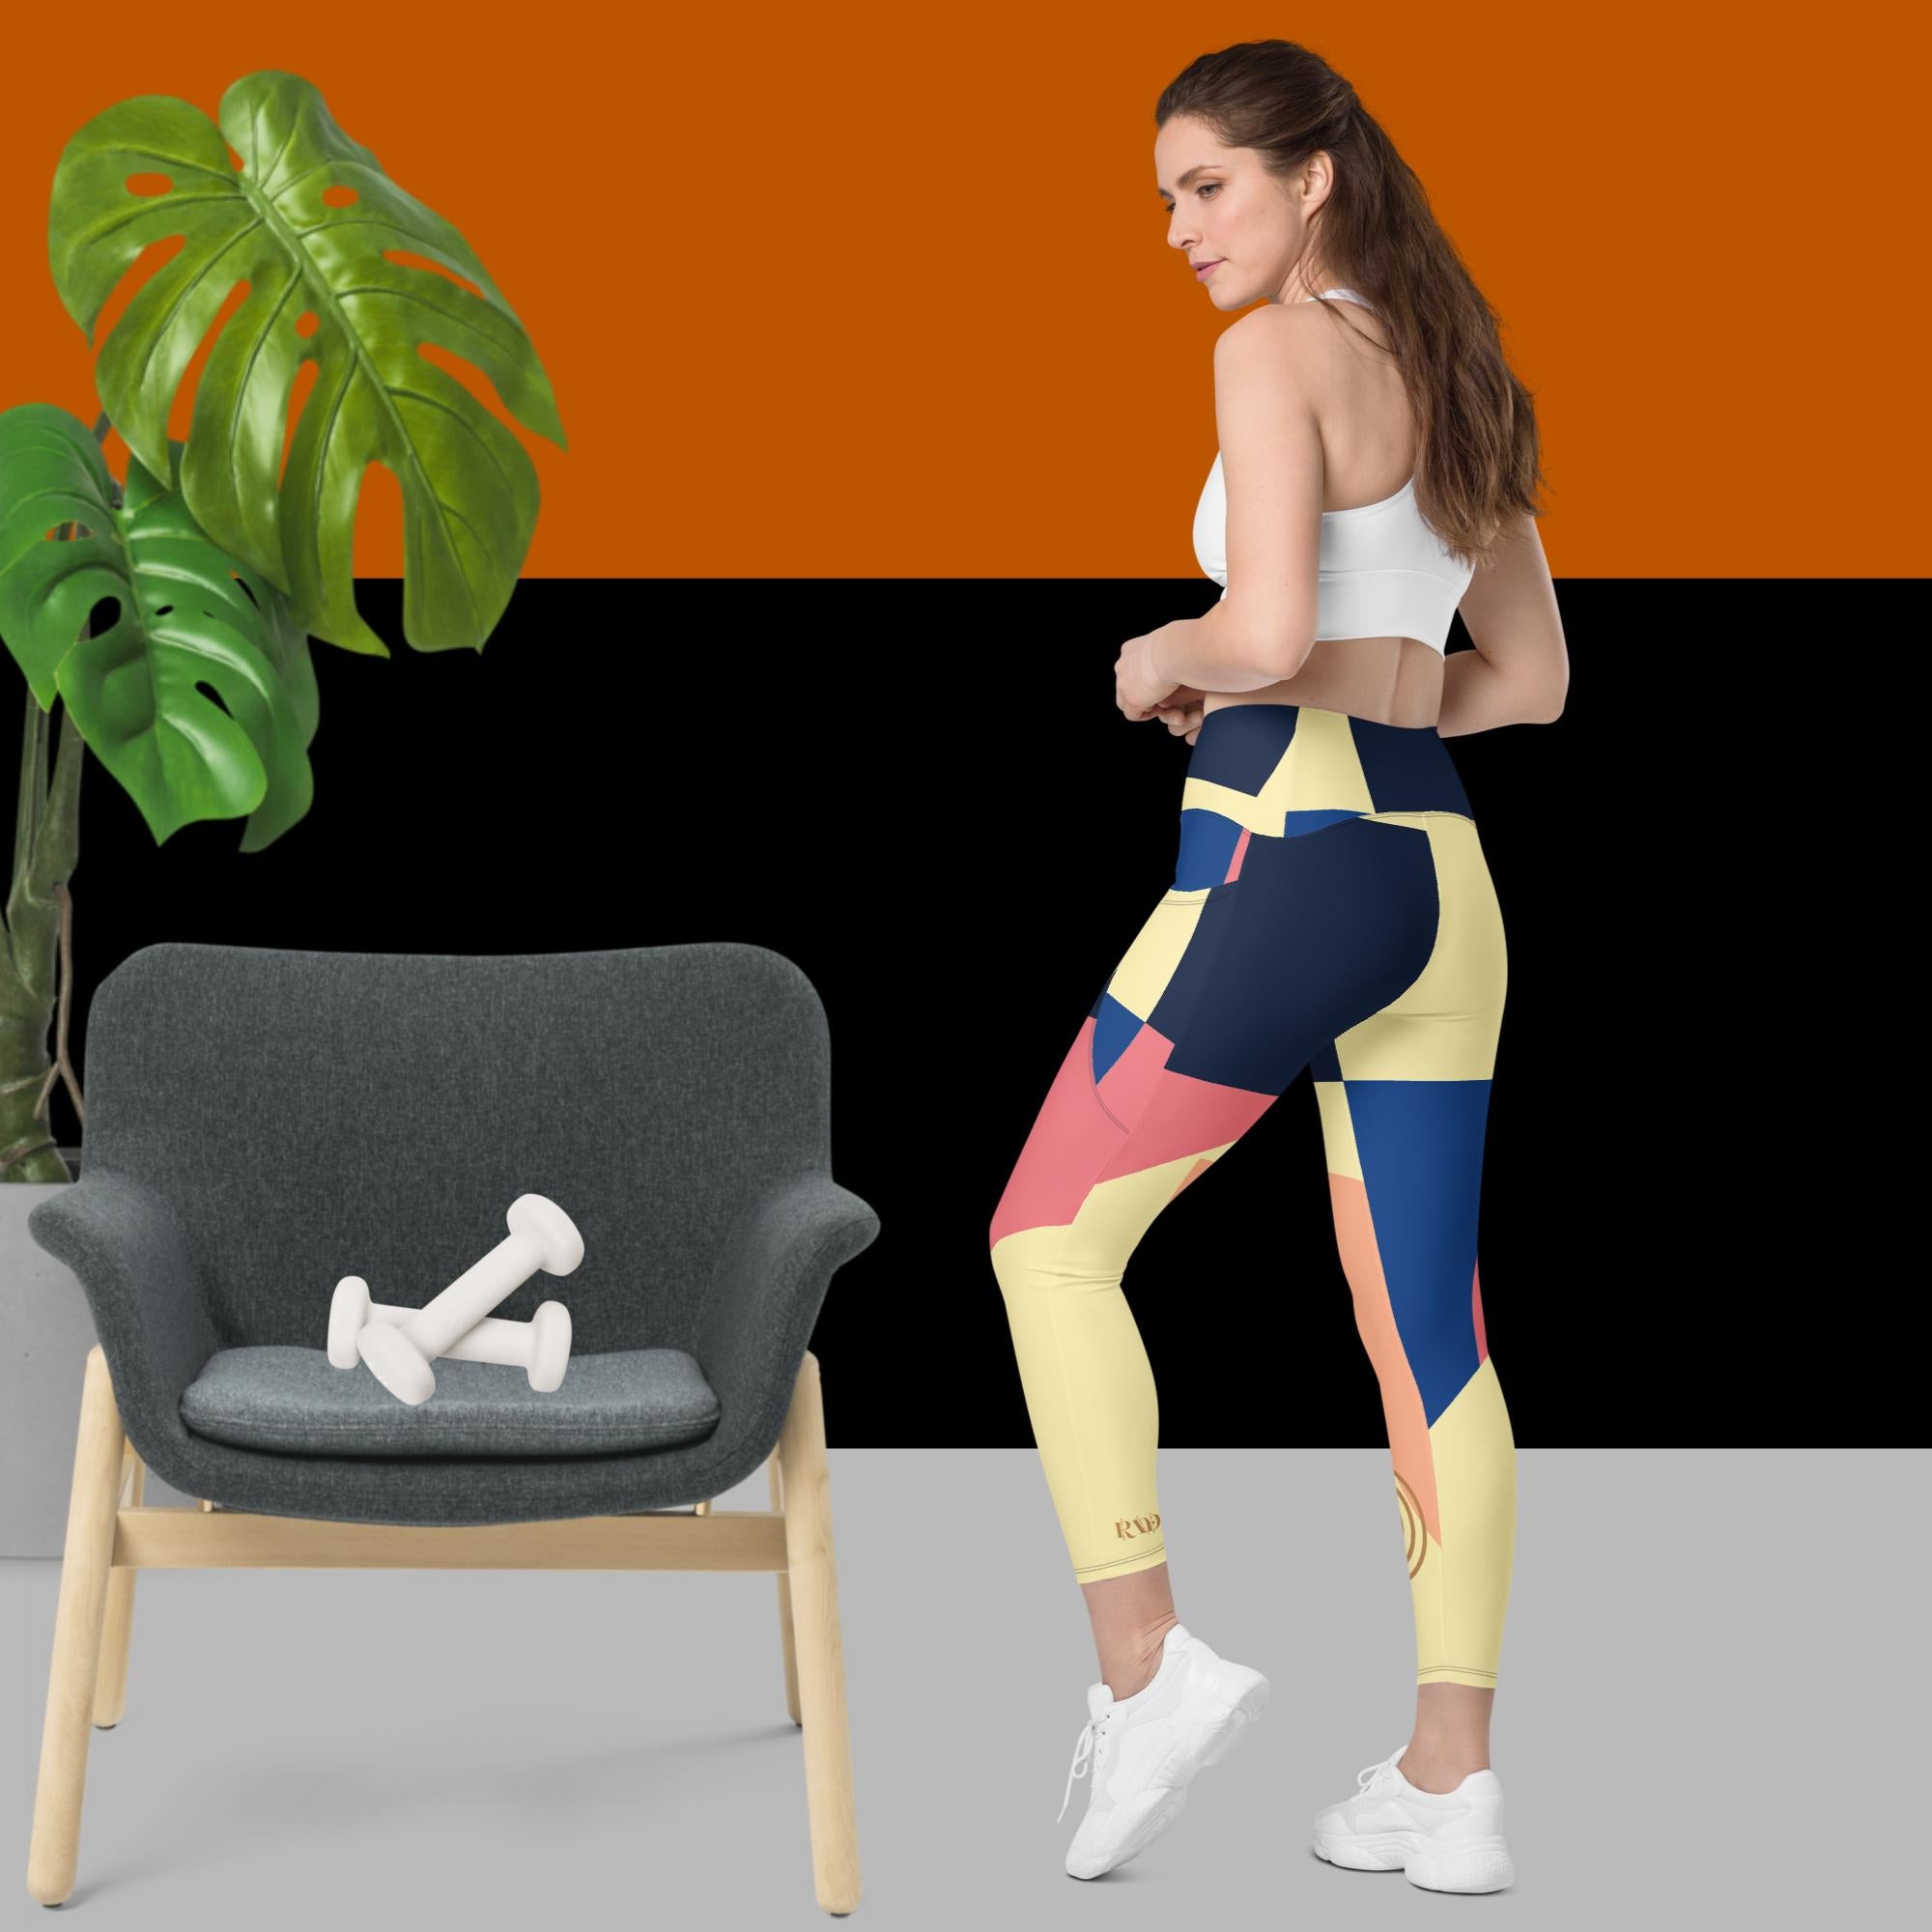 Activewear Abstract Pocket Leggings and Tights - Revive Wear     Get comfortable in style with our Abstract Pocket Leggings. Designed with a unique print, they also have functional pockets for convenience. Order online today!